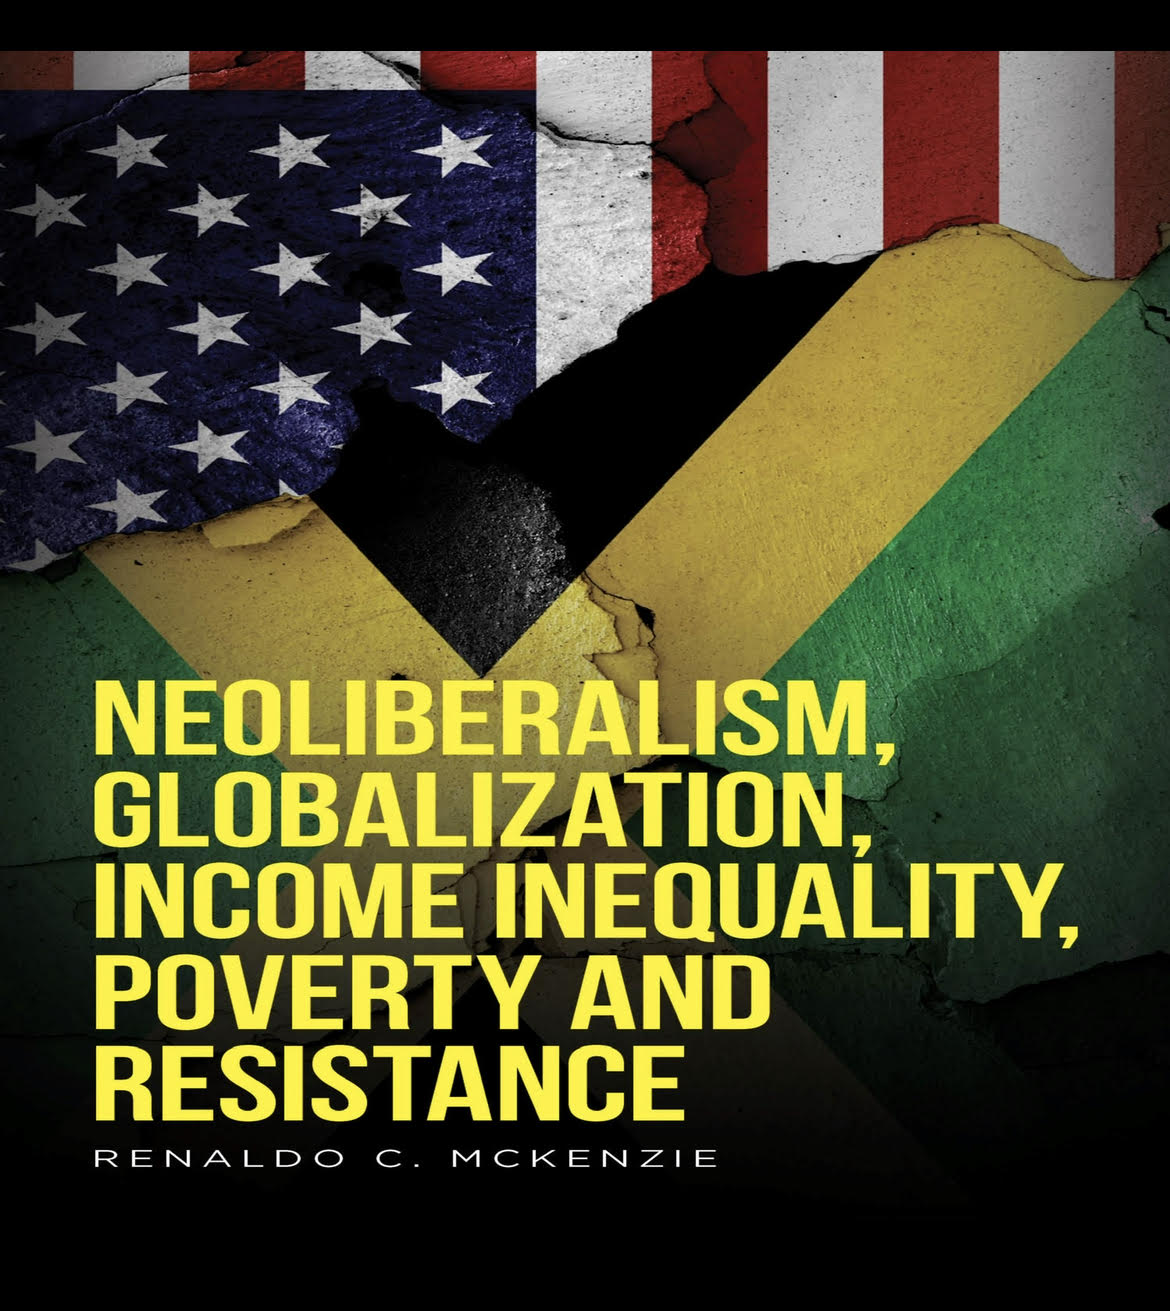 Notice of Copyright Infringement for Book “Neoliberalism, Globalization, Income Inequality, Poverty and Resistance”